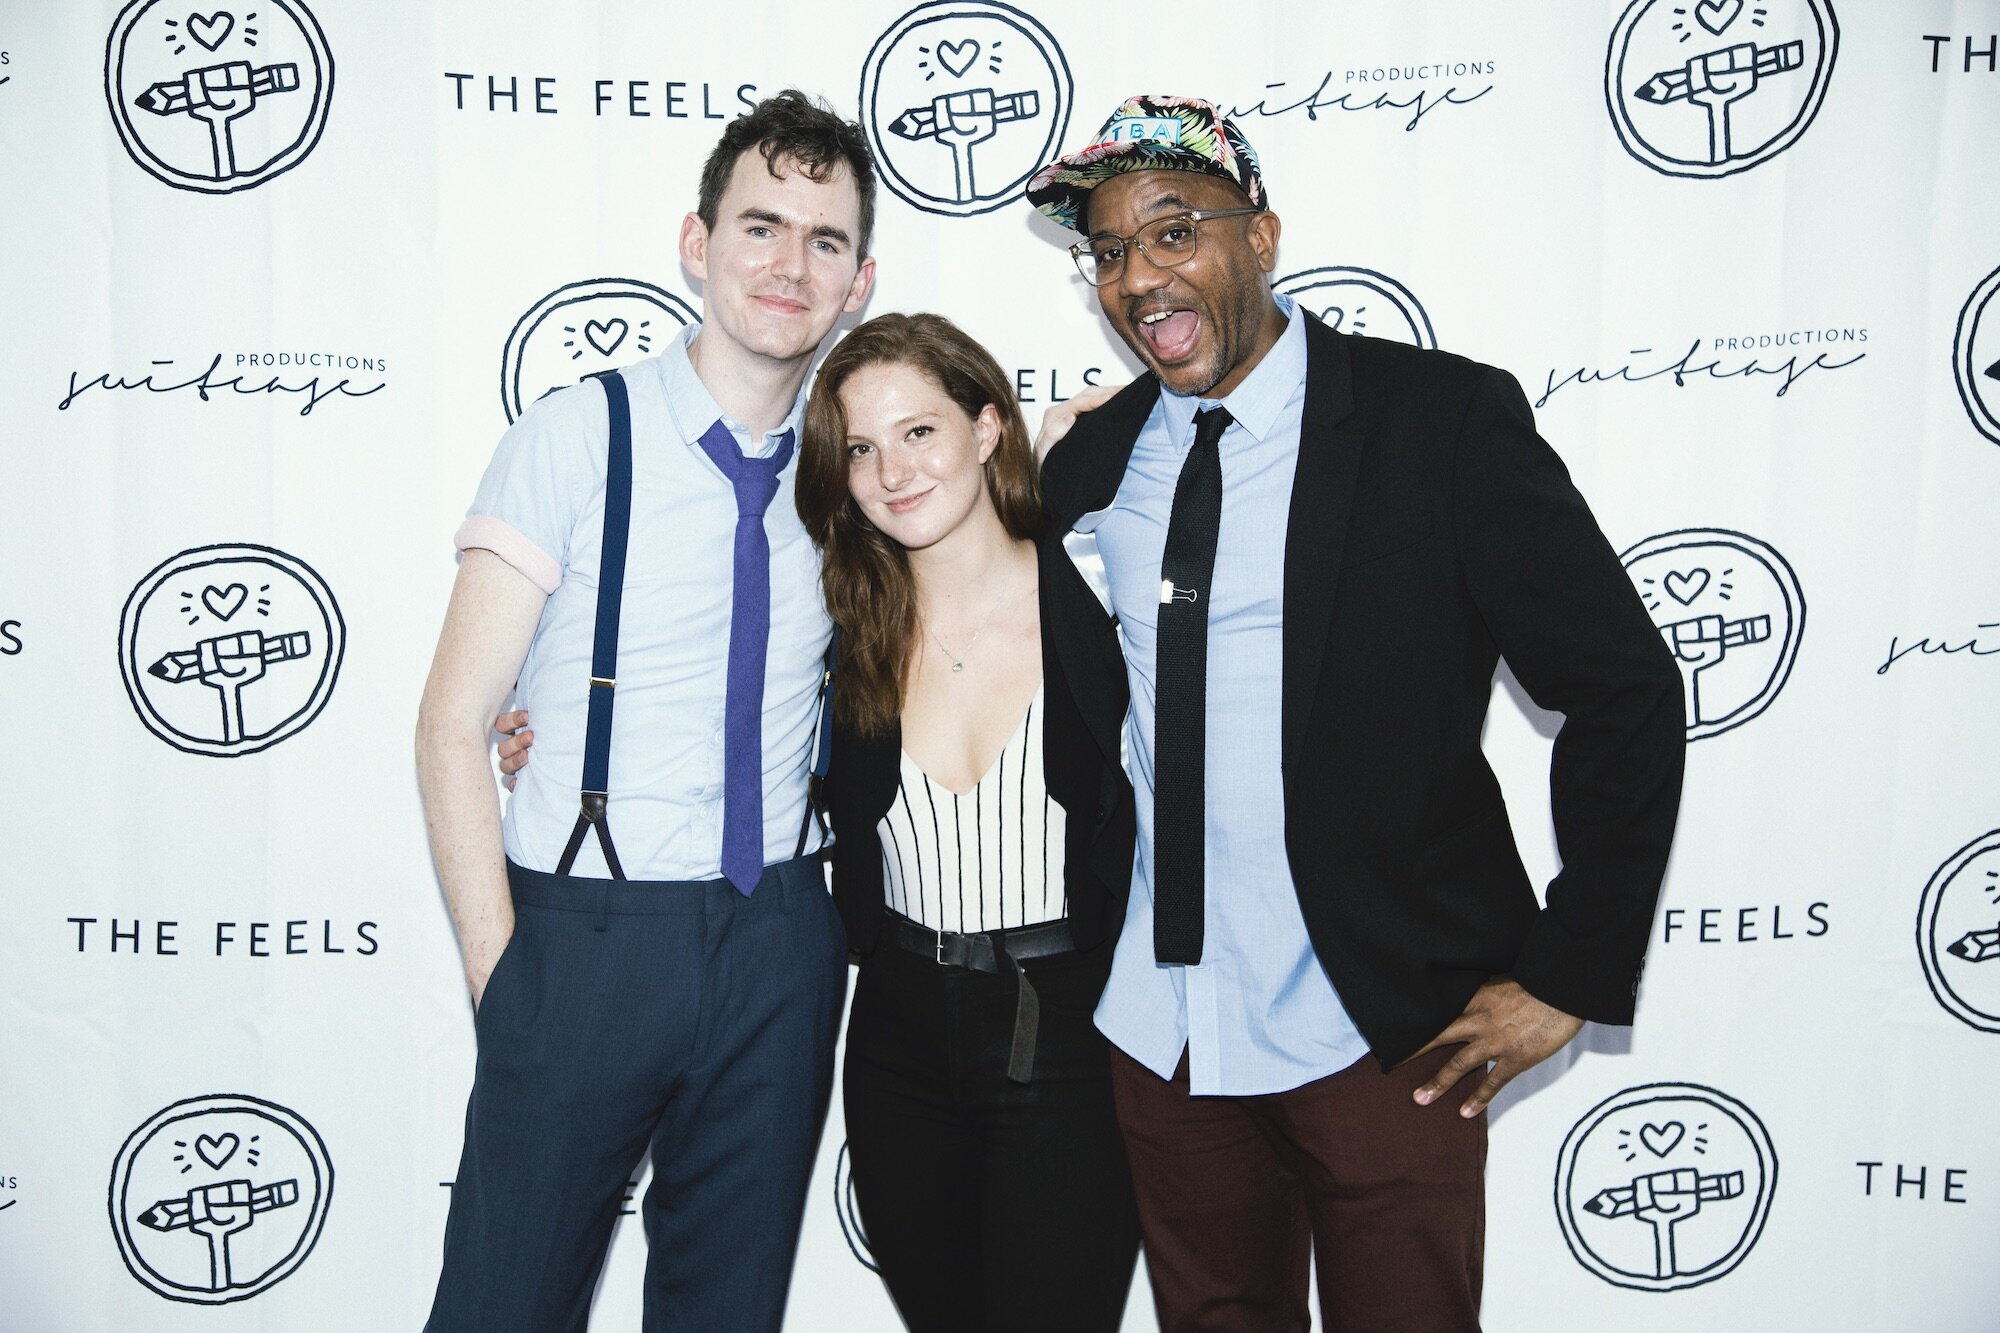  Tim Manley, Camden Elizabeth of Suitcase Productions, and Naje Lataillade, at THE FEELS: BRAVE HOUSE screening at New York City’s IFC Center 